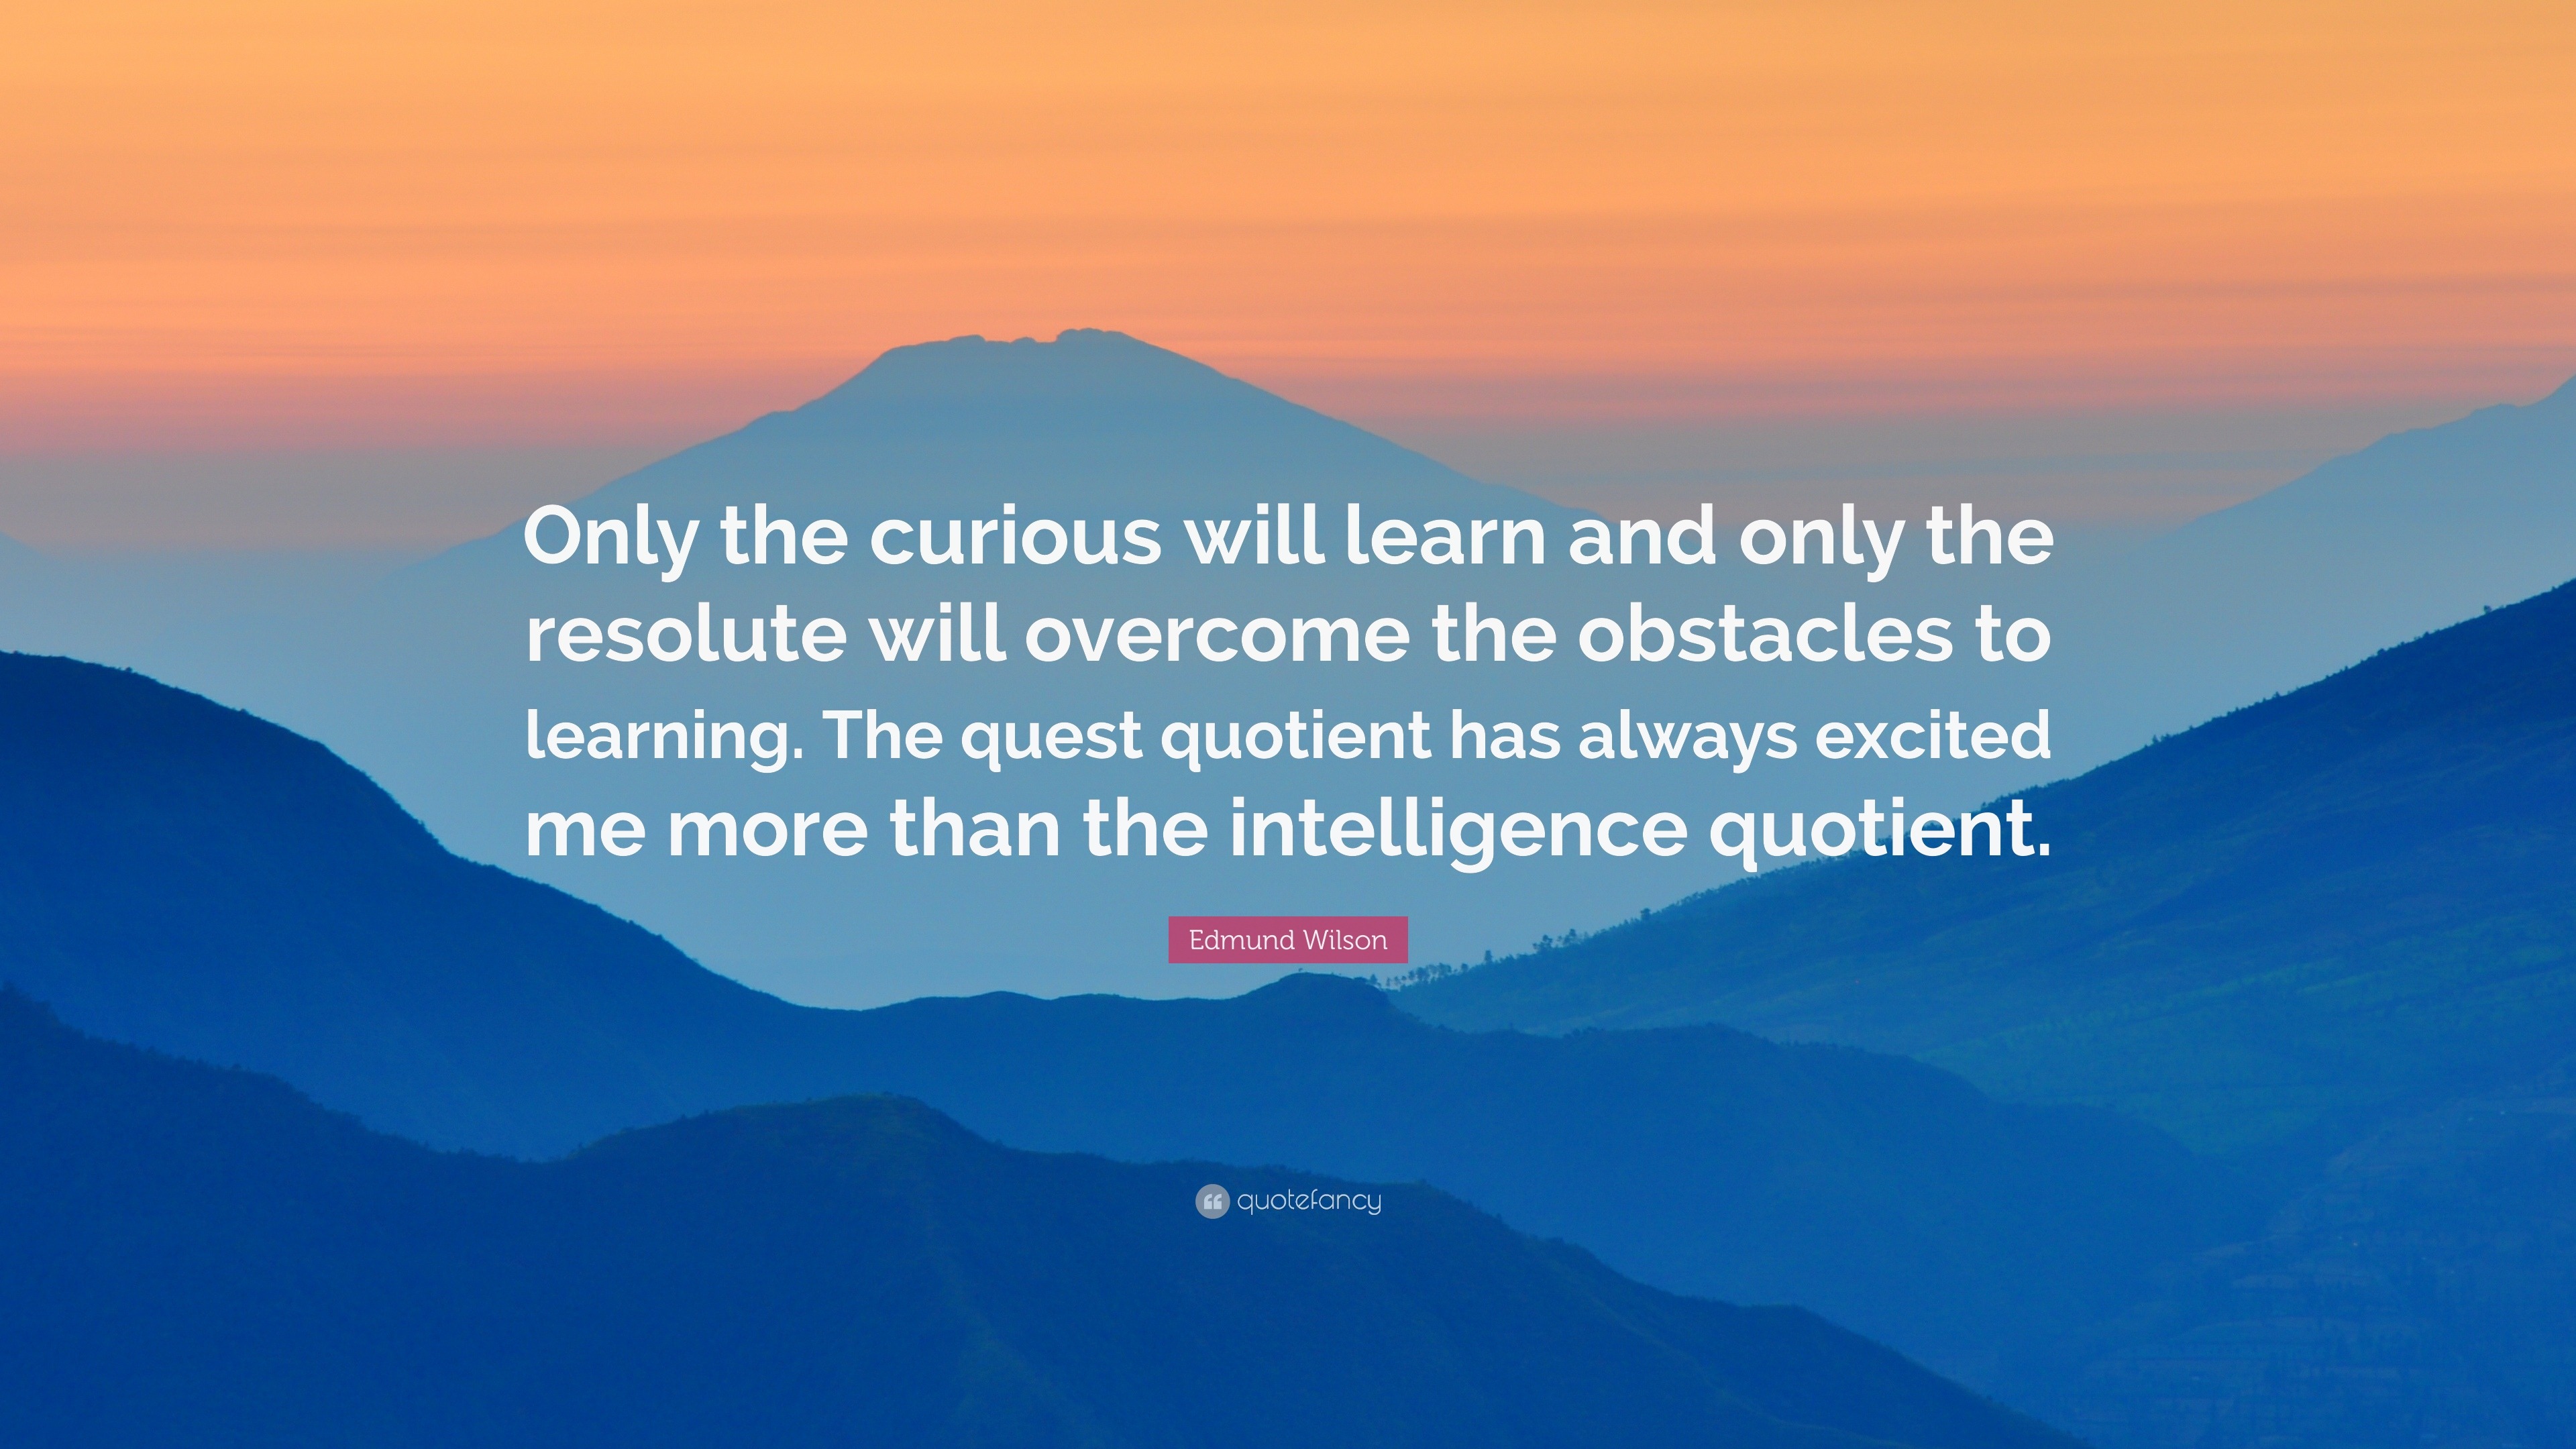 Edmund Wilson Quote: “Only the curious will learn and only the resolute ...